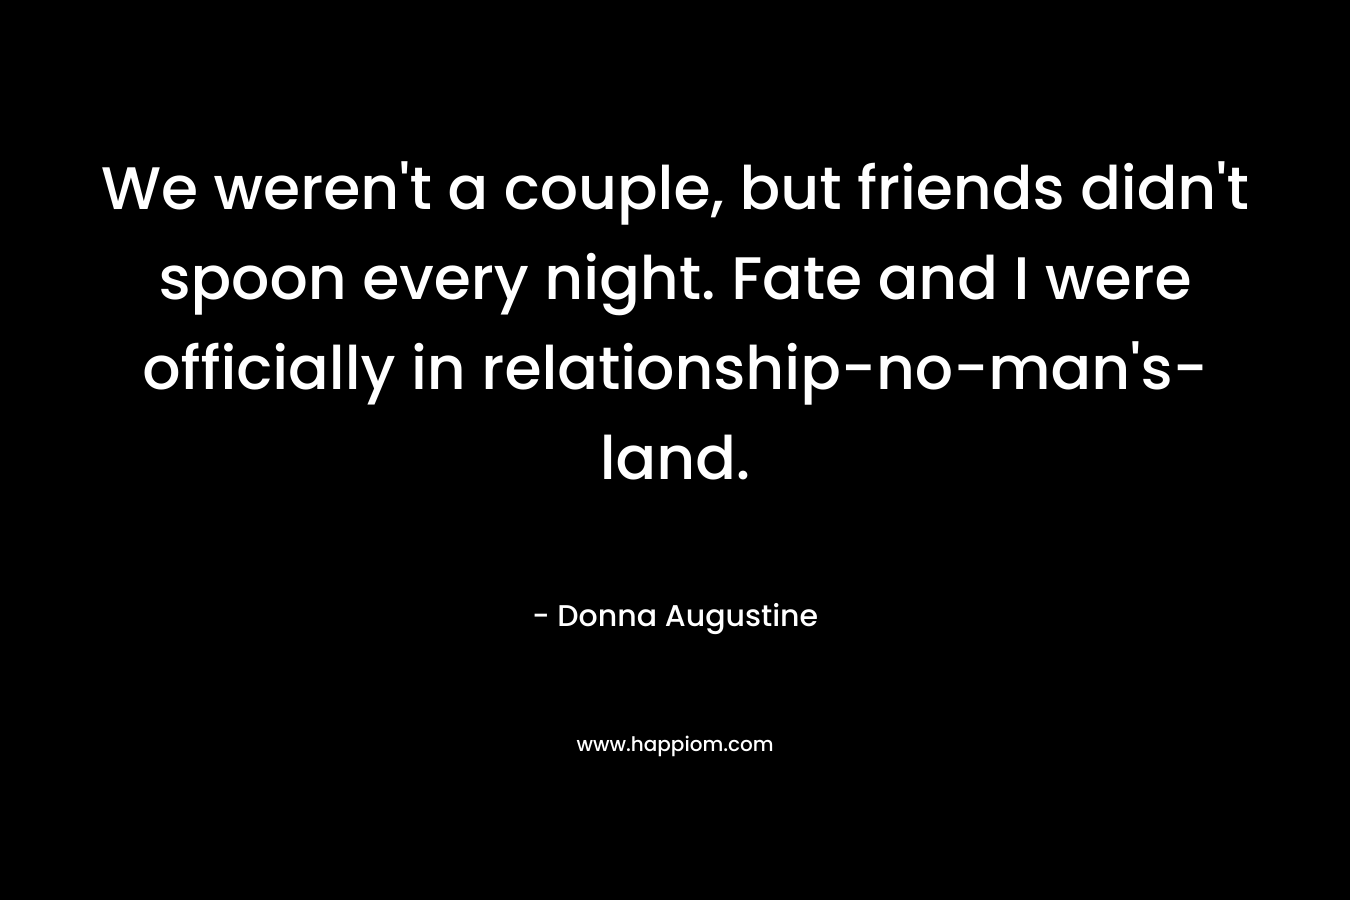 We weren’t a couple, but friends didn’t spoon every night. Fate and I were officially in relationship-no-man’s-land. – Donna Augustine